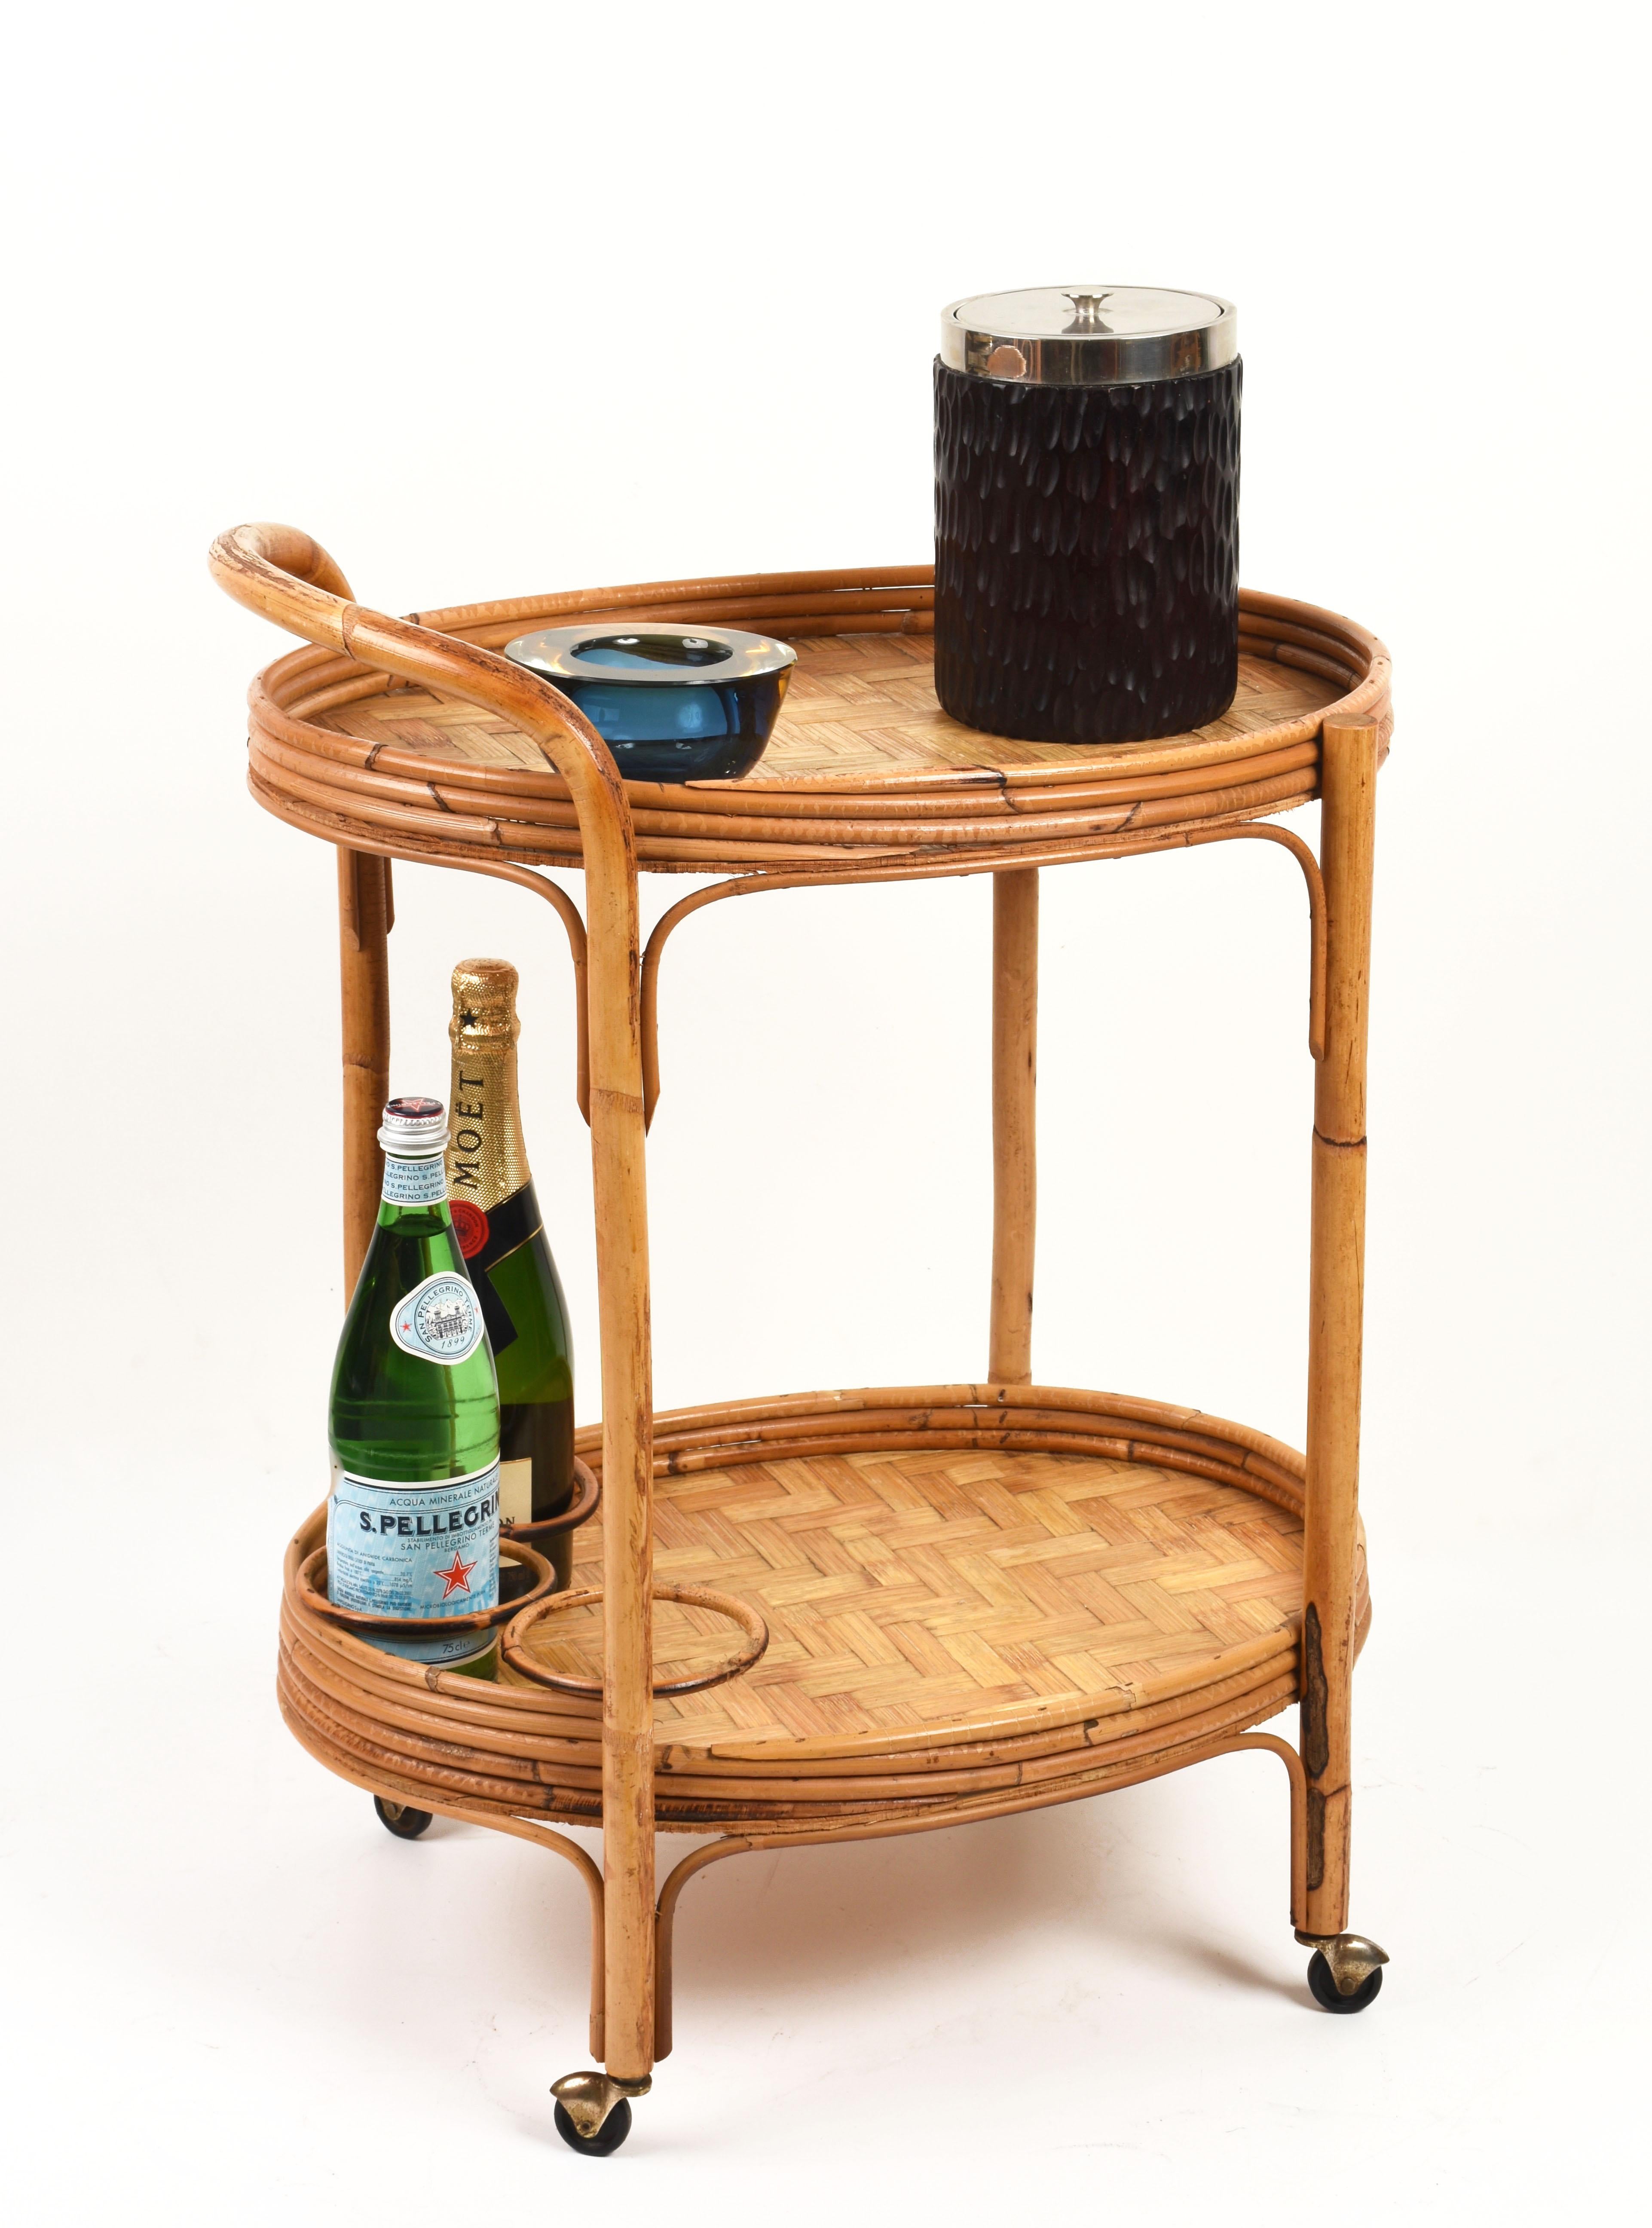 Midcentury Italian Bamboo and Rattan Oval Serving Side Bar Cart, 1960s 6